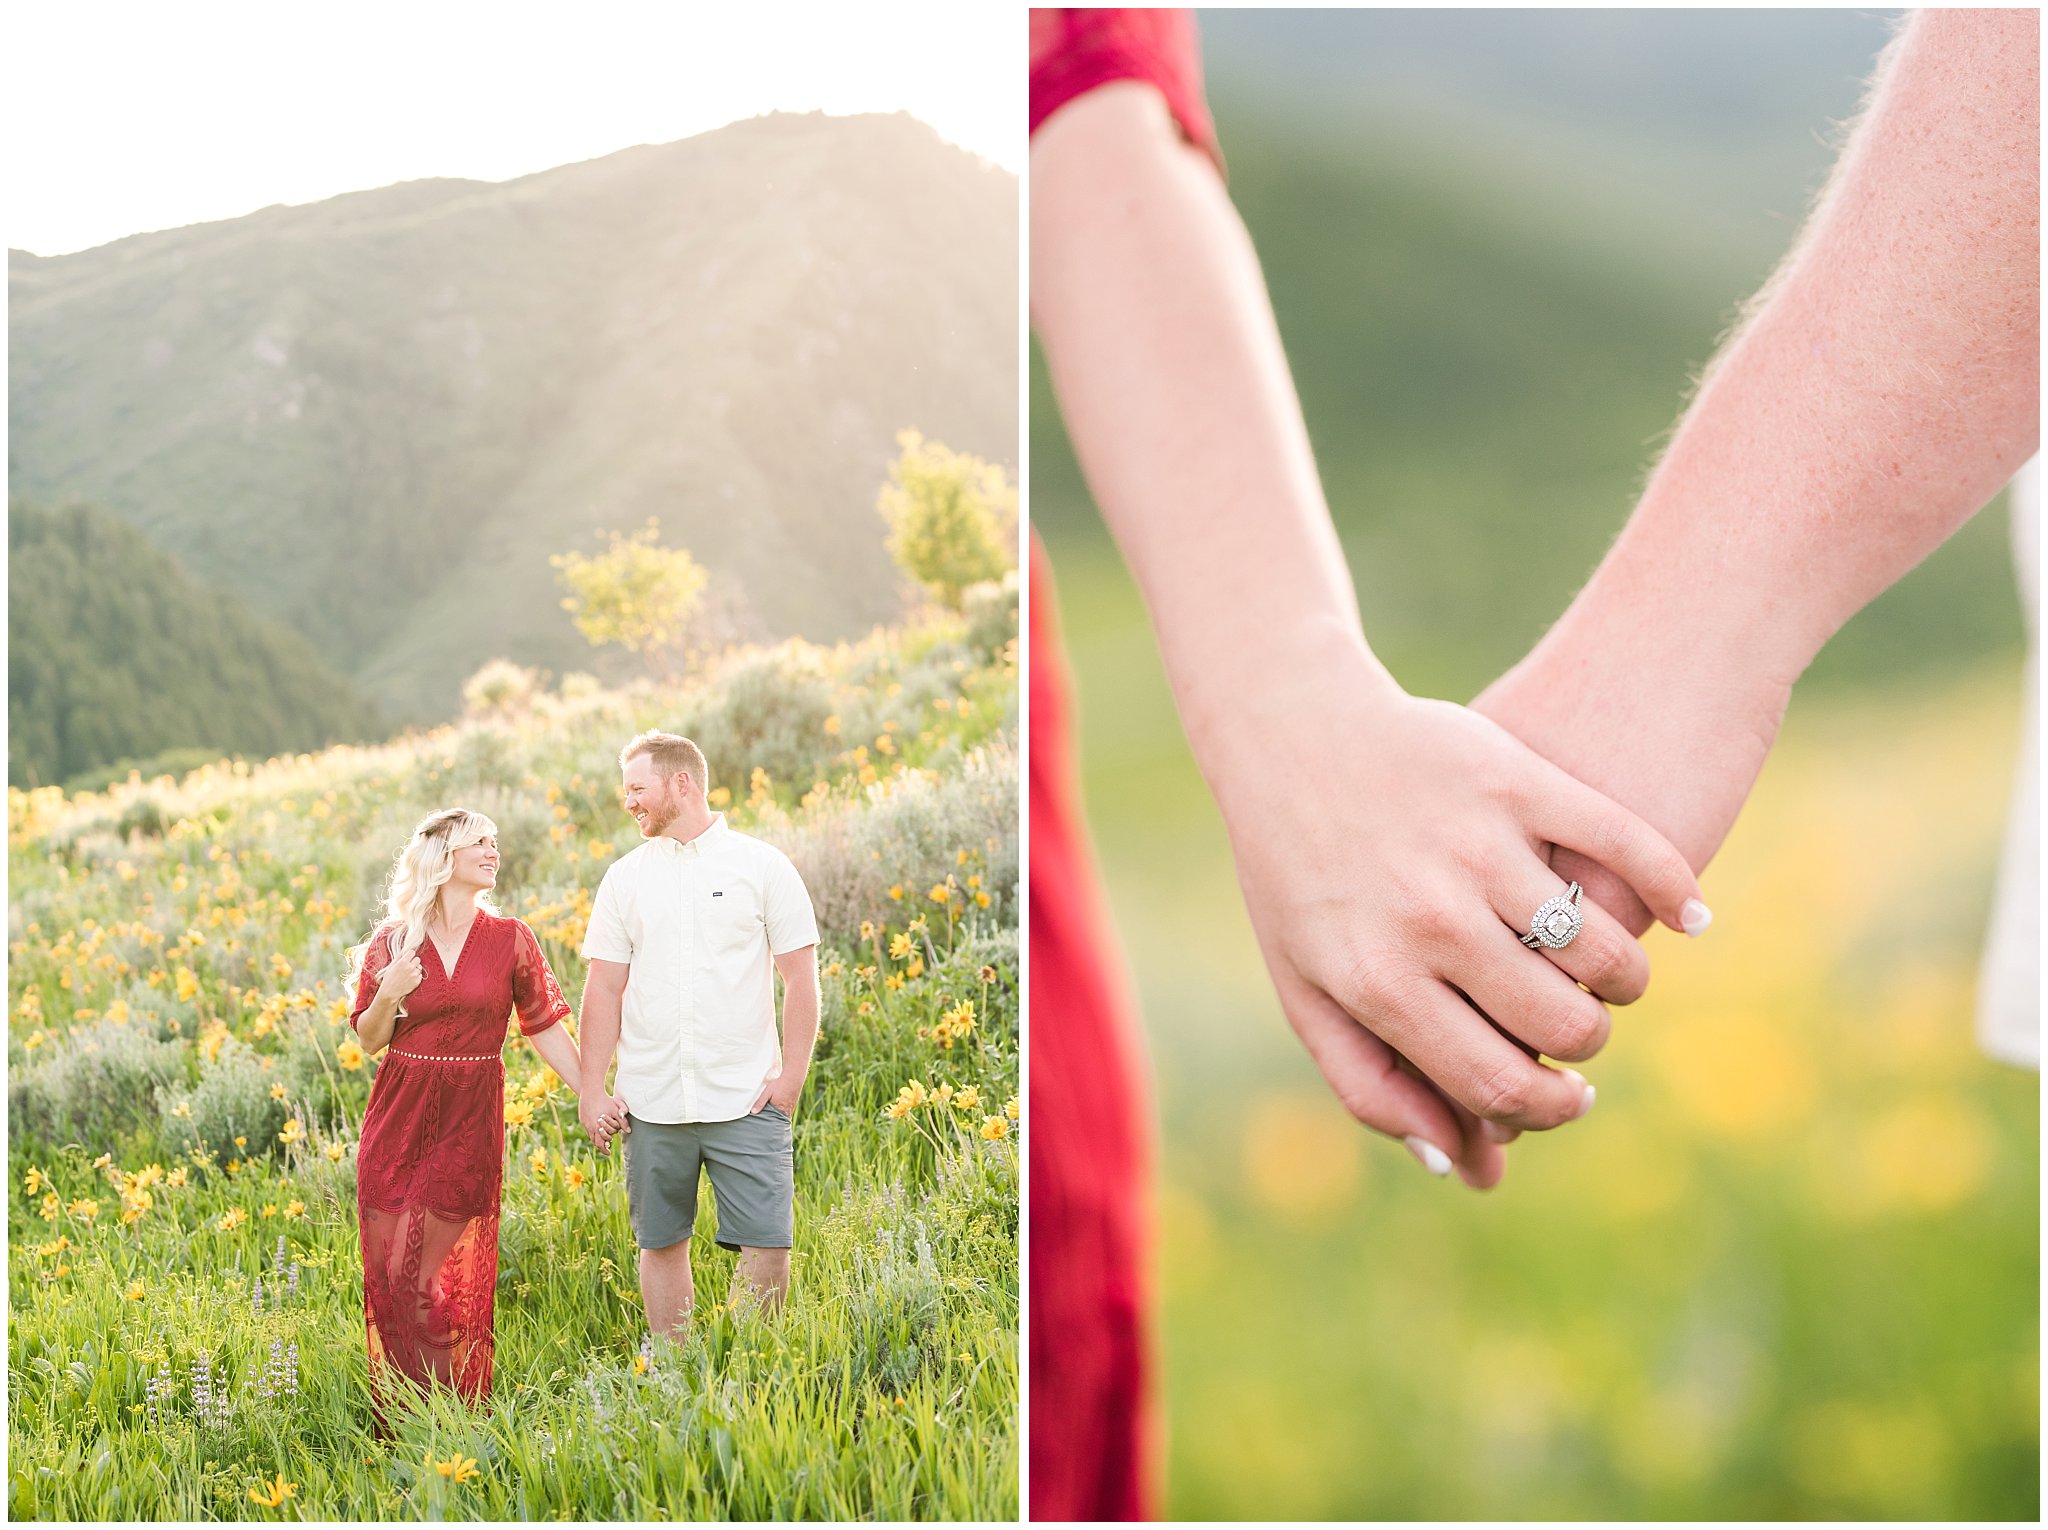 Couple in red lace dress in the sunflowers with mountain peaks | Wildflower Engagement in the Utah Mountains | Utah Engagement Photography | Jessie and Dallin Photography